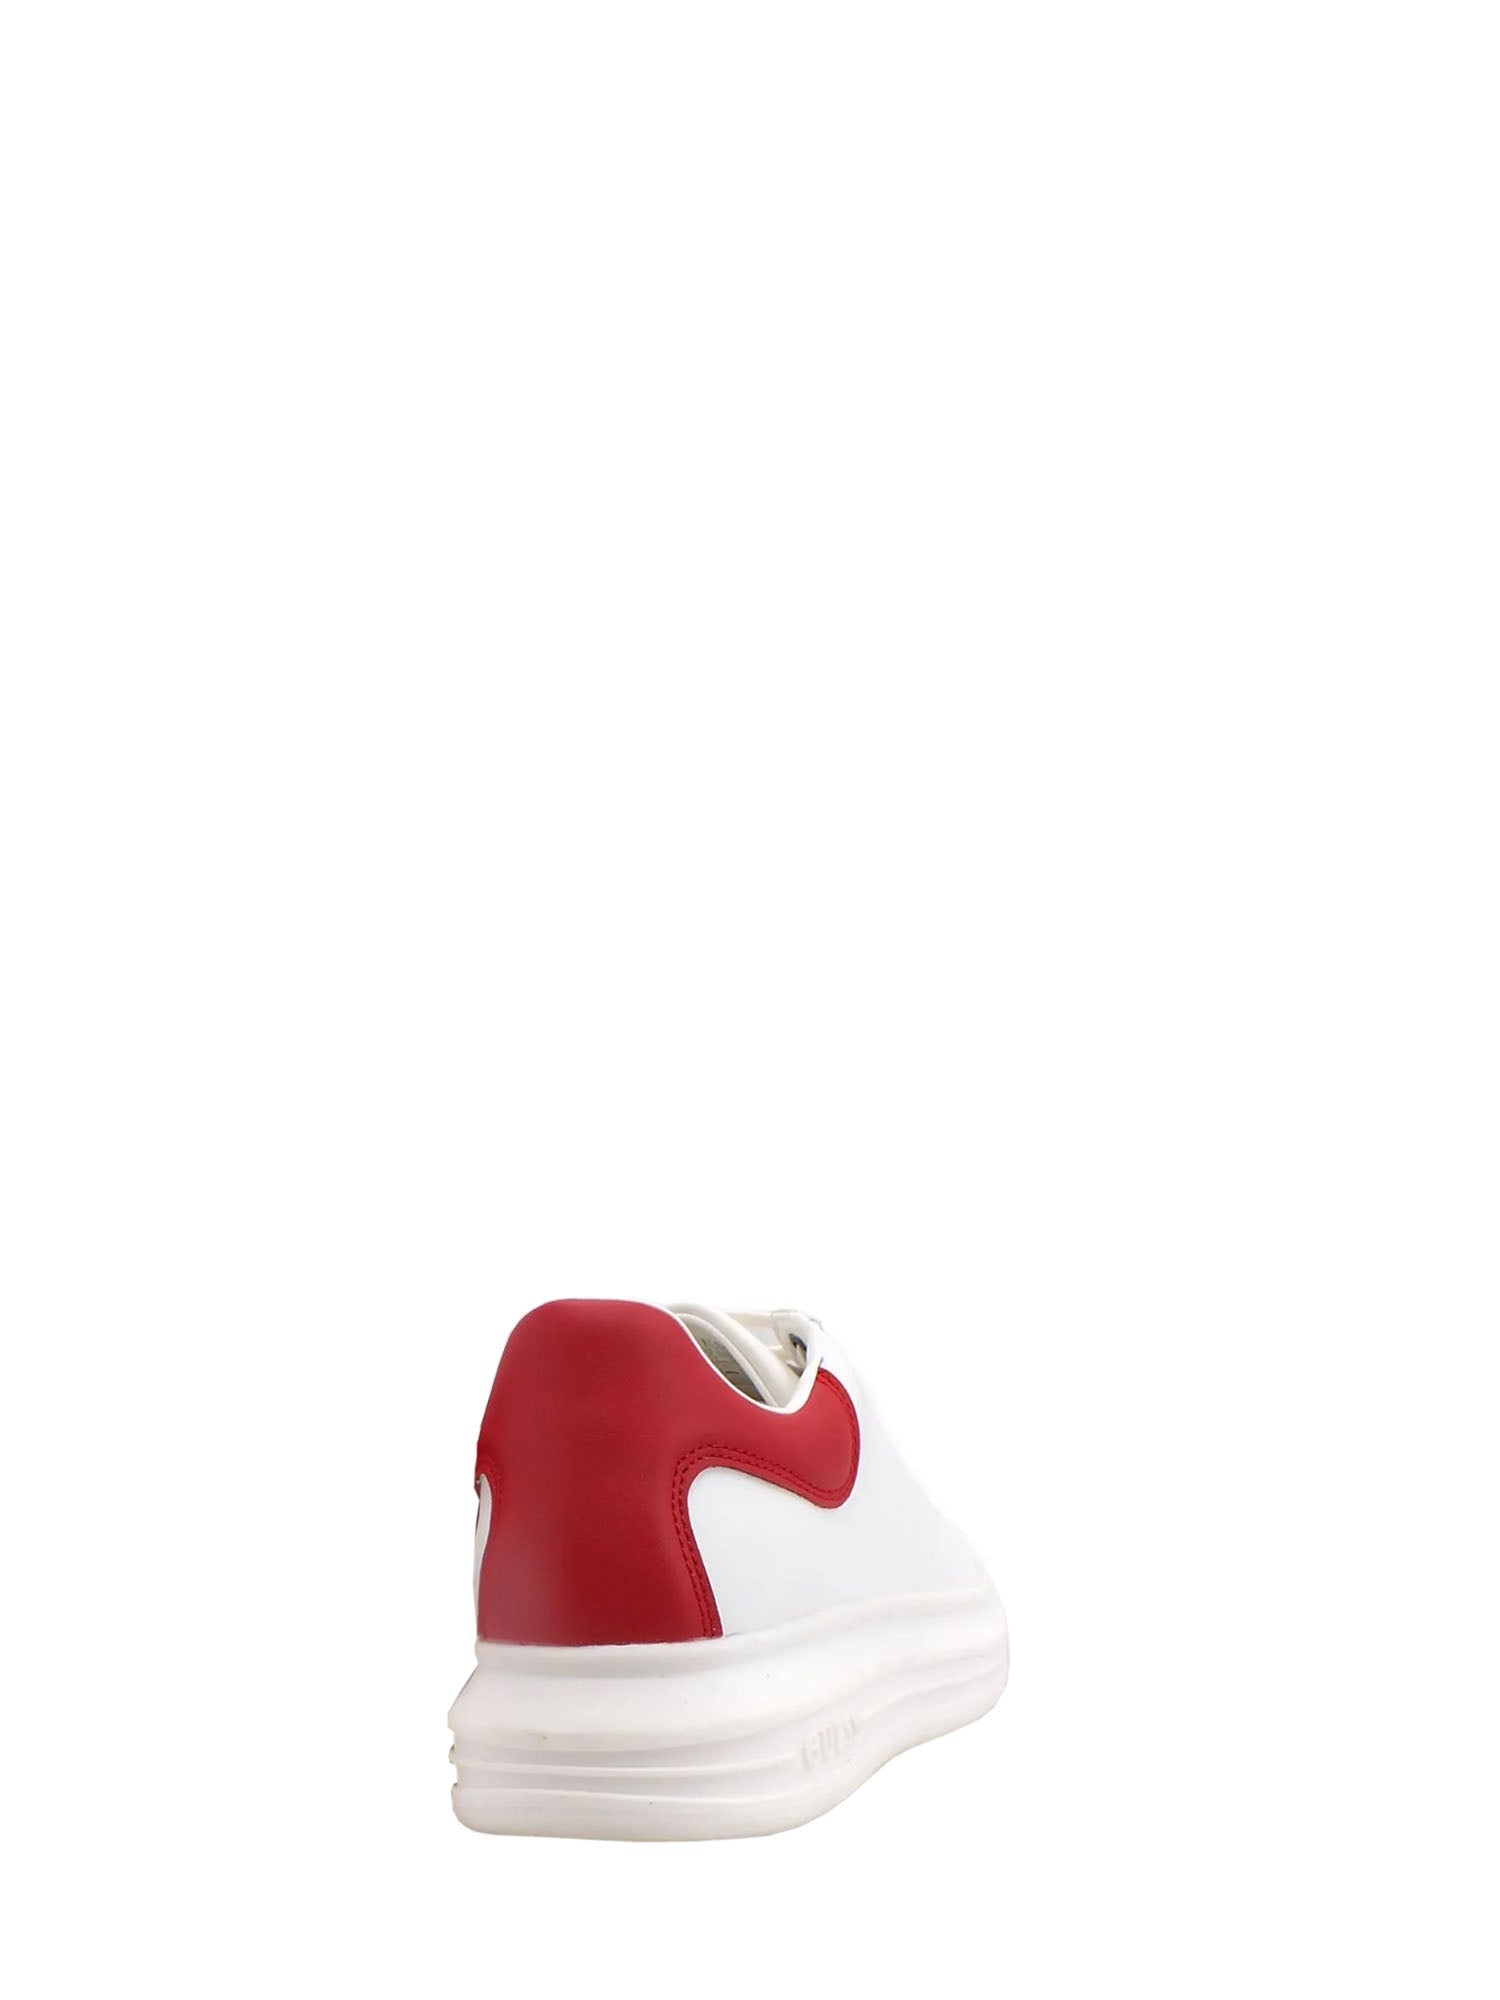 GUESS JEANS SNEAKERS SALERNO BIANCO - ROSSO